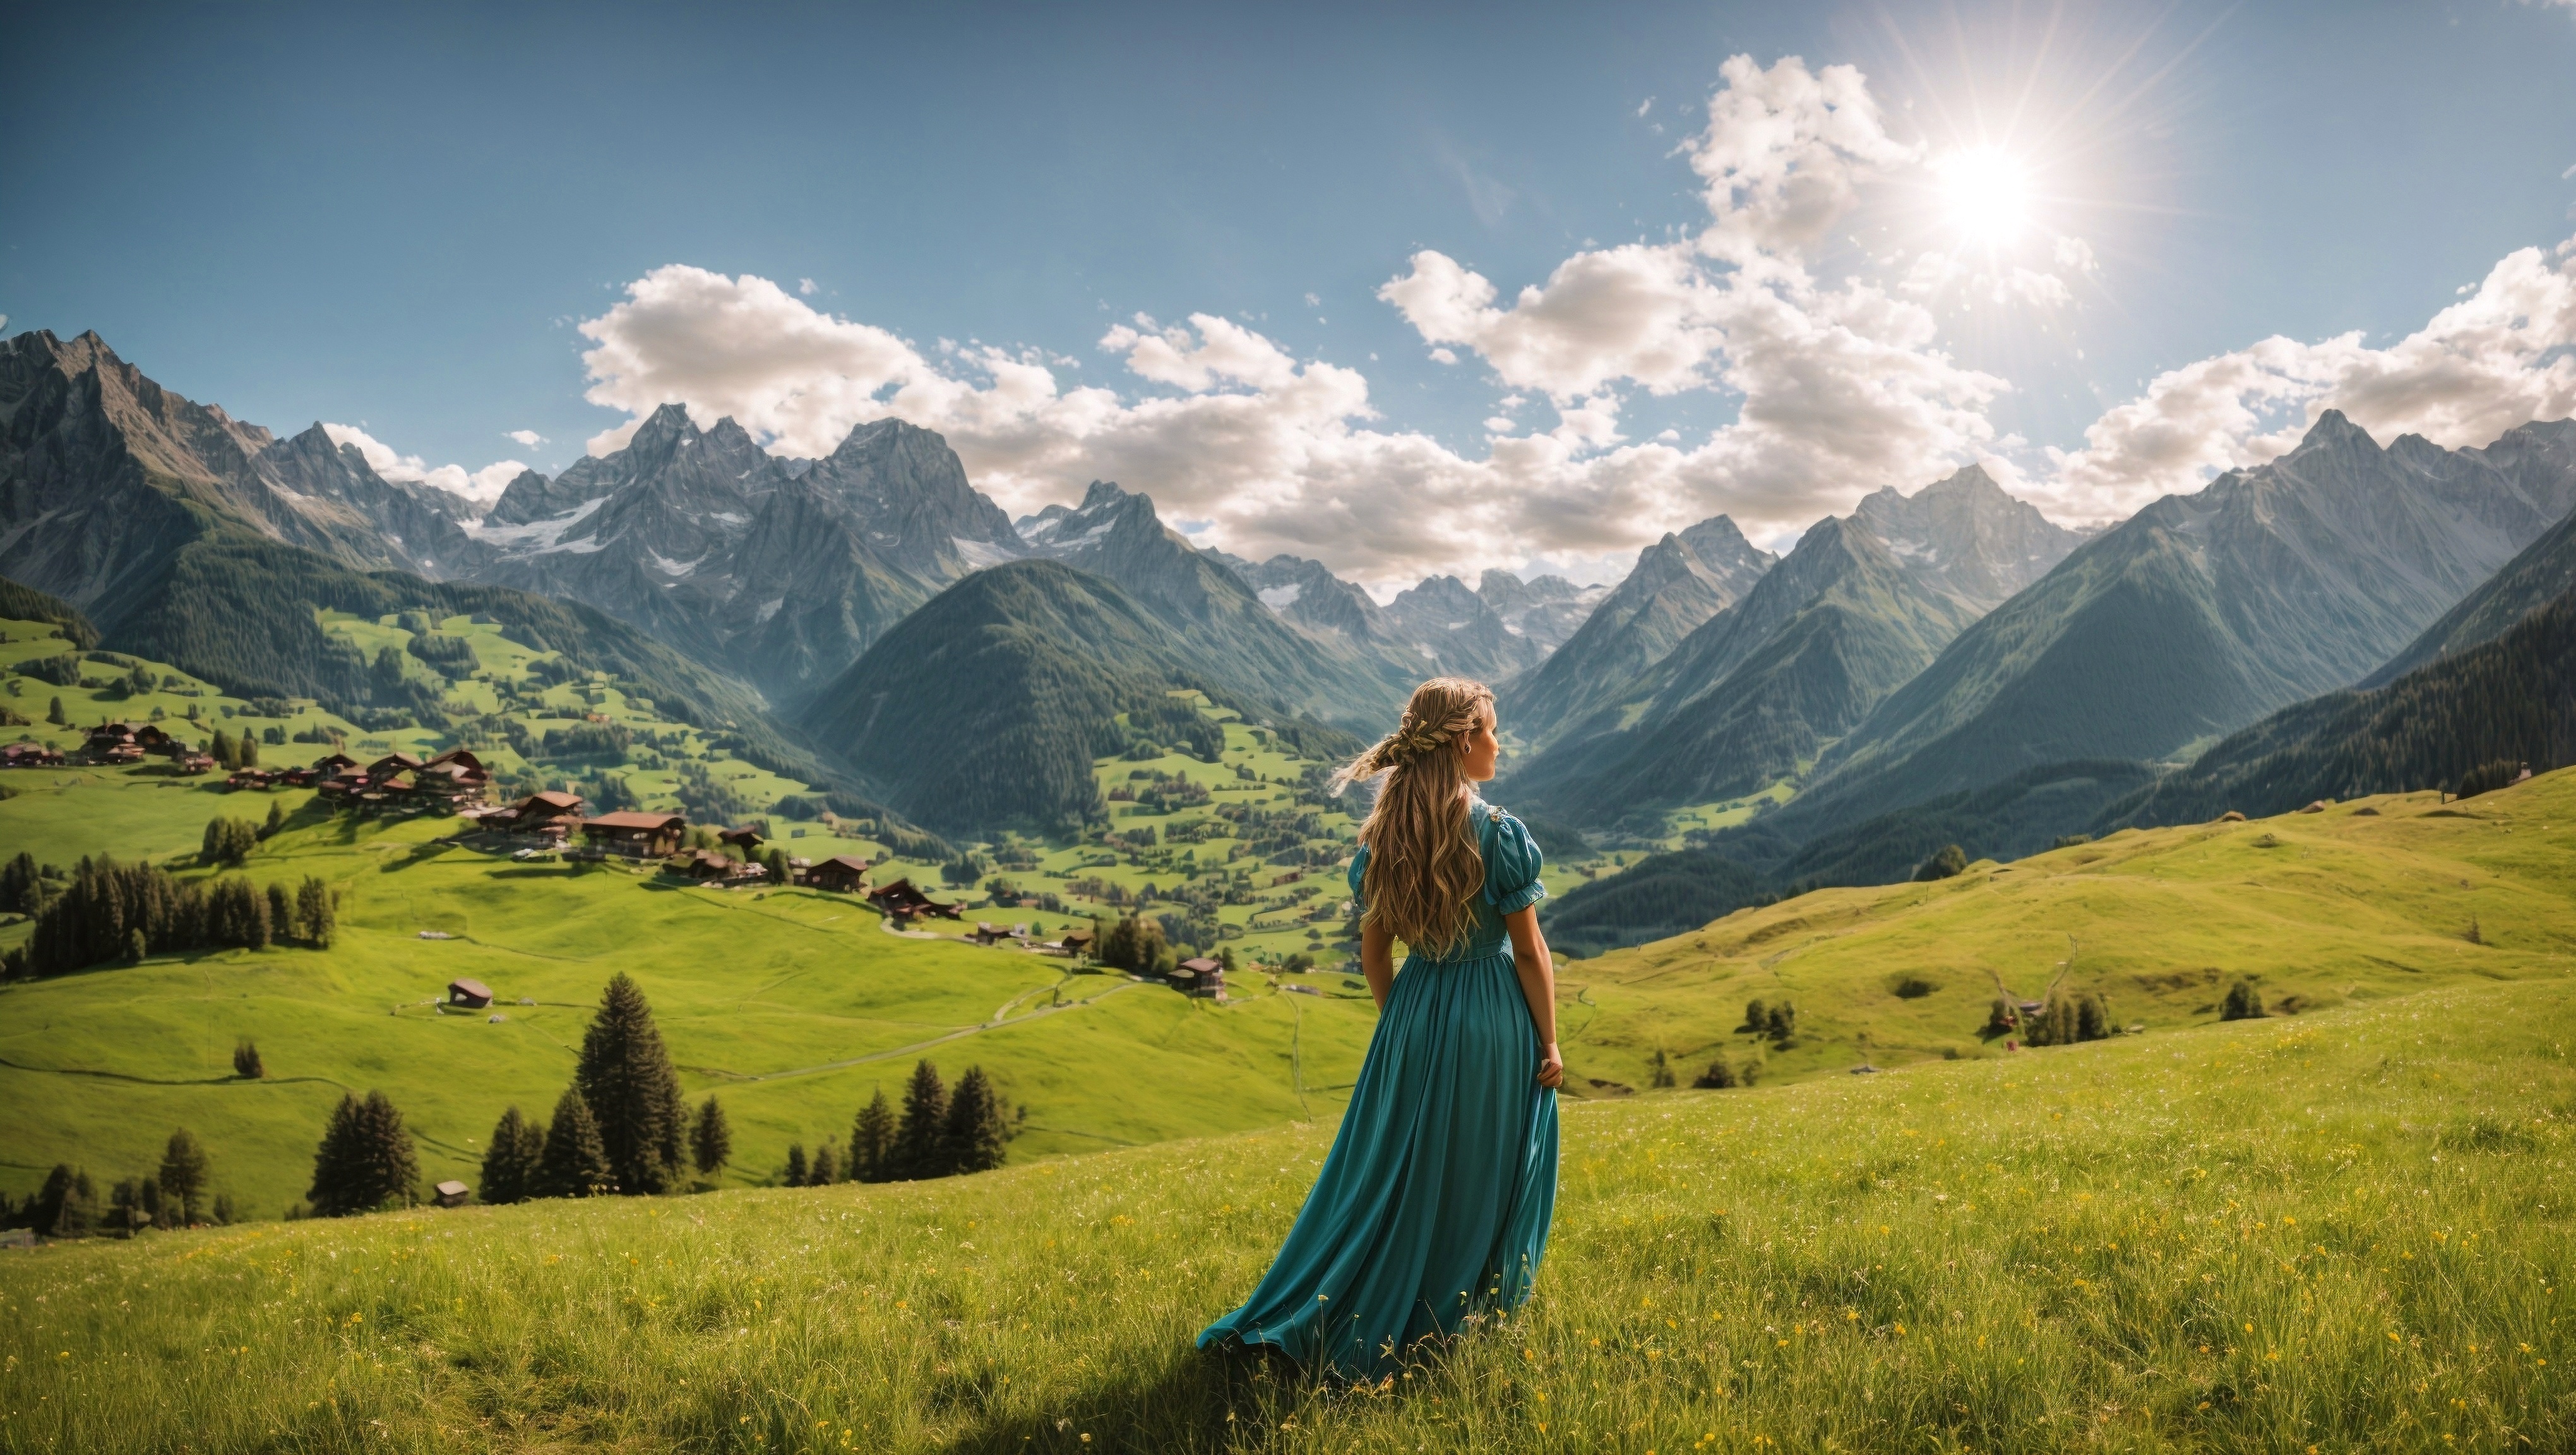 The woman is standing near the mountains looking at something